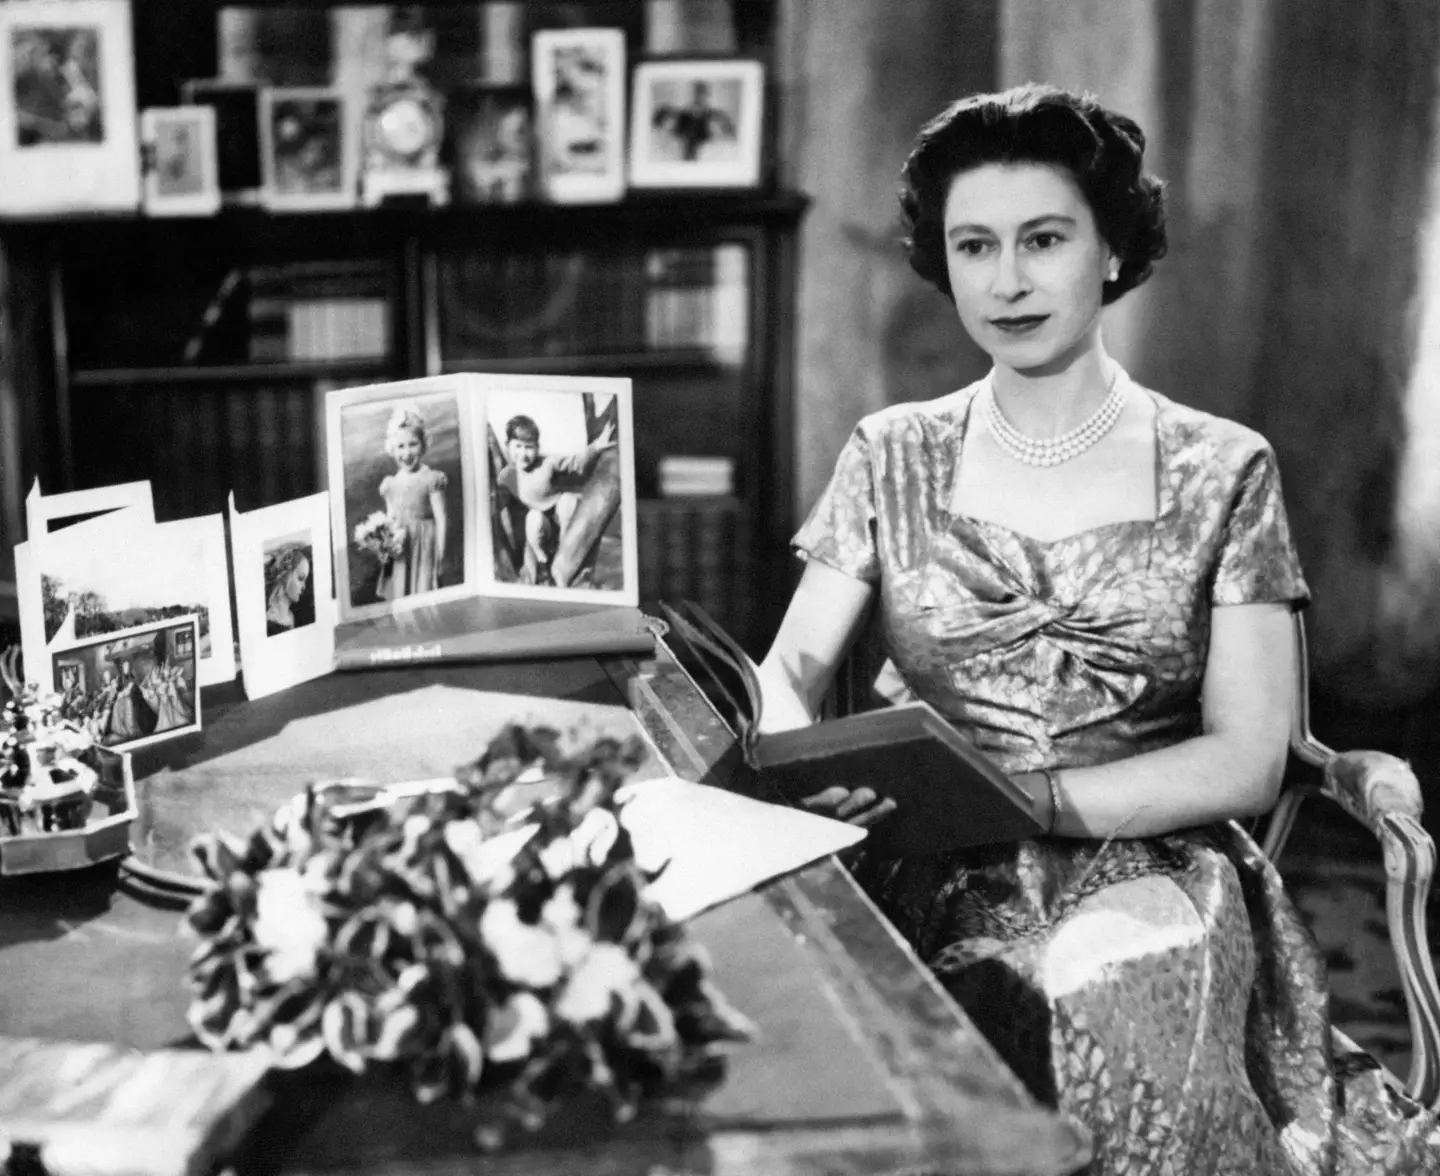 The Queen's Christmas Message was shown on TV for the first time in 1957.